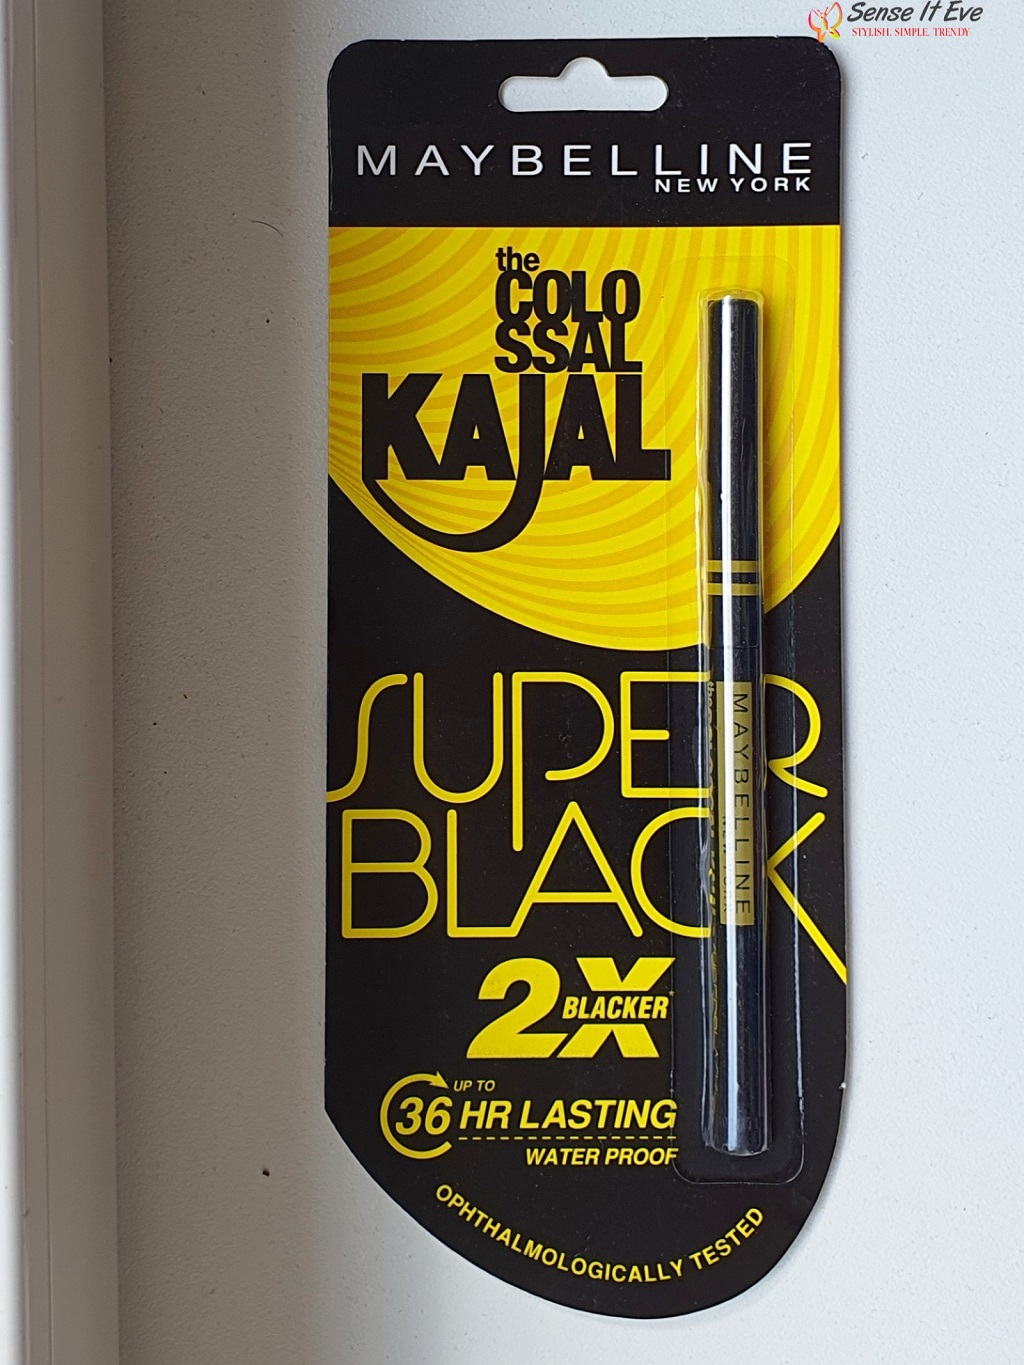 Maybelline The Colossal Kajal Super Black Review Sense It Eve Maybelline The Colossal Kajal Super Black : Review & Swatches